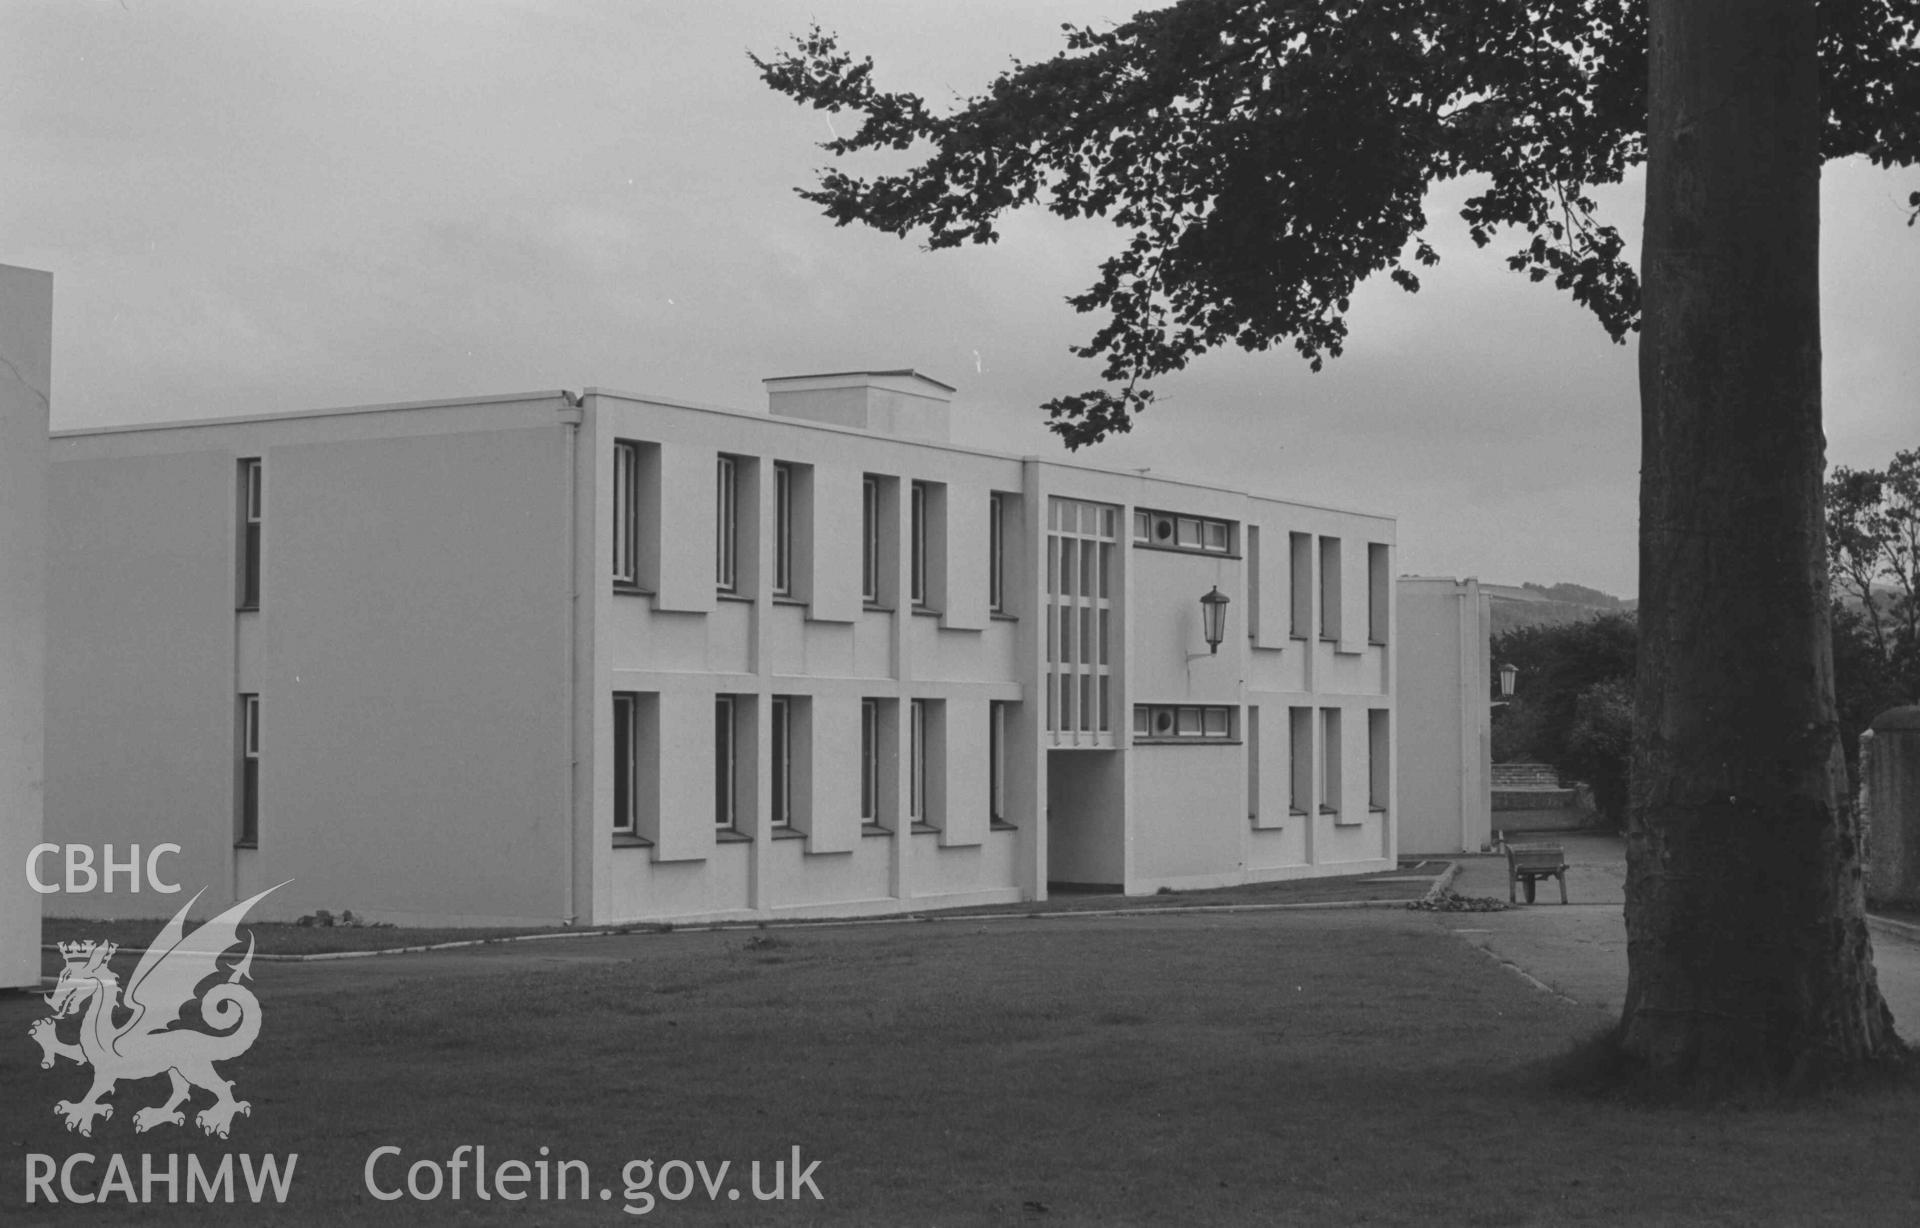 Digital copy of a black and white negative showing the new college buildings (Harfod accommodation block) immediately south of the Canterbury building at Lampeter College. Photographed by Arthur Chater on 21 August 1968. Looking south east from Grid Reference SN 579 481.